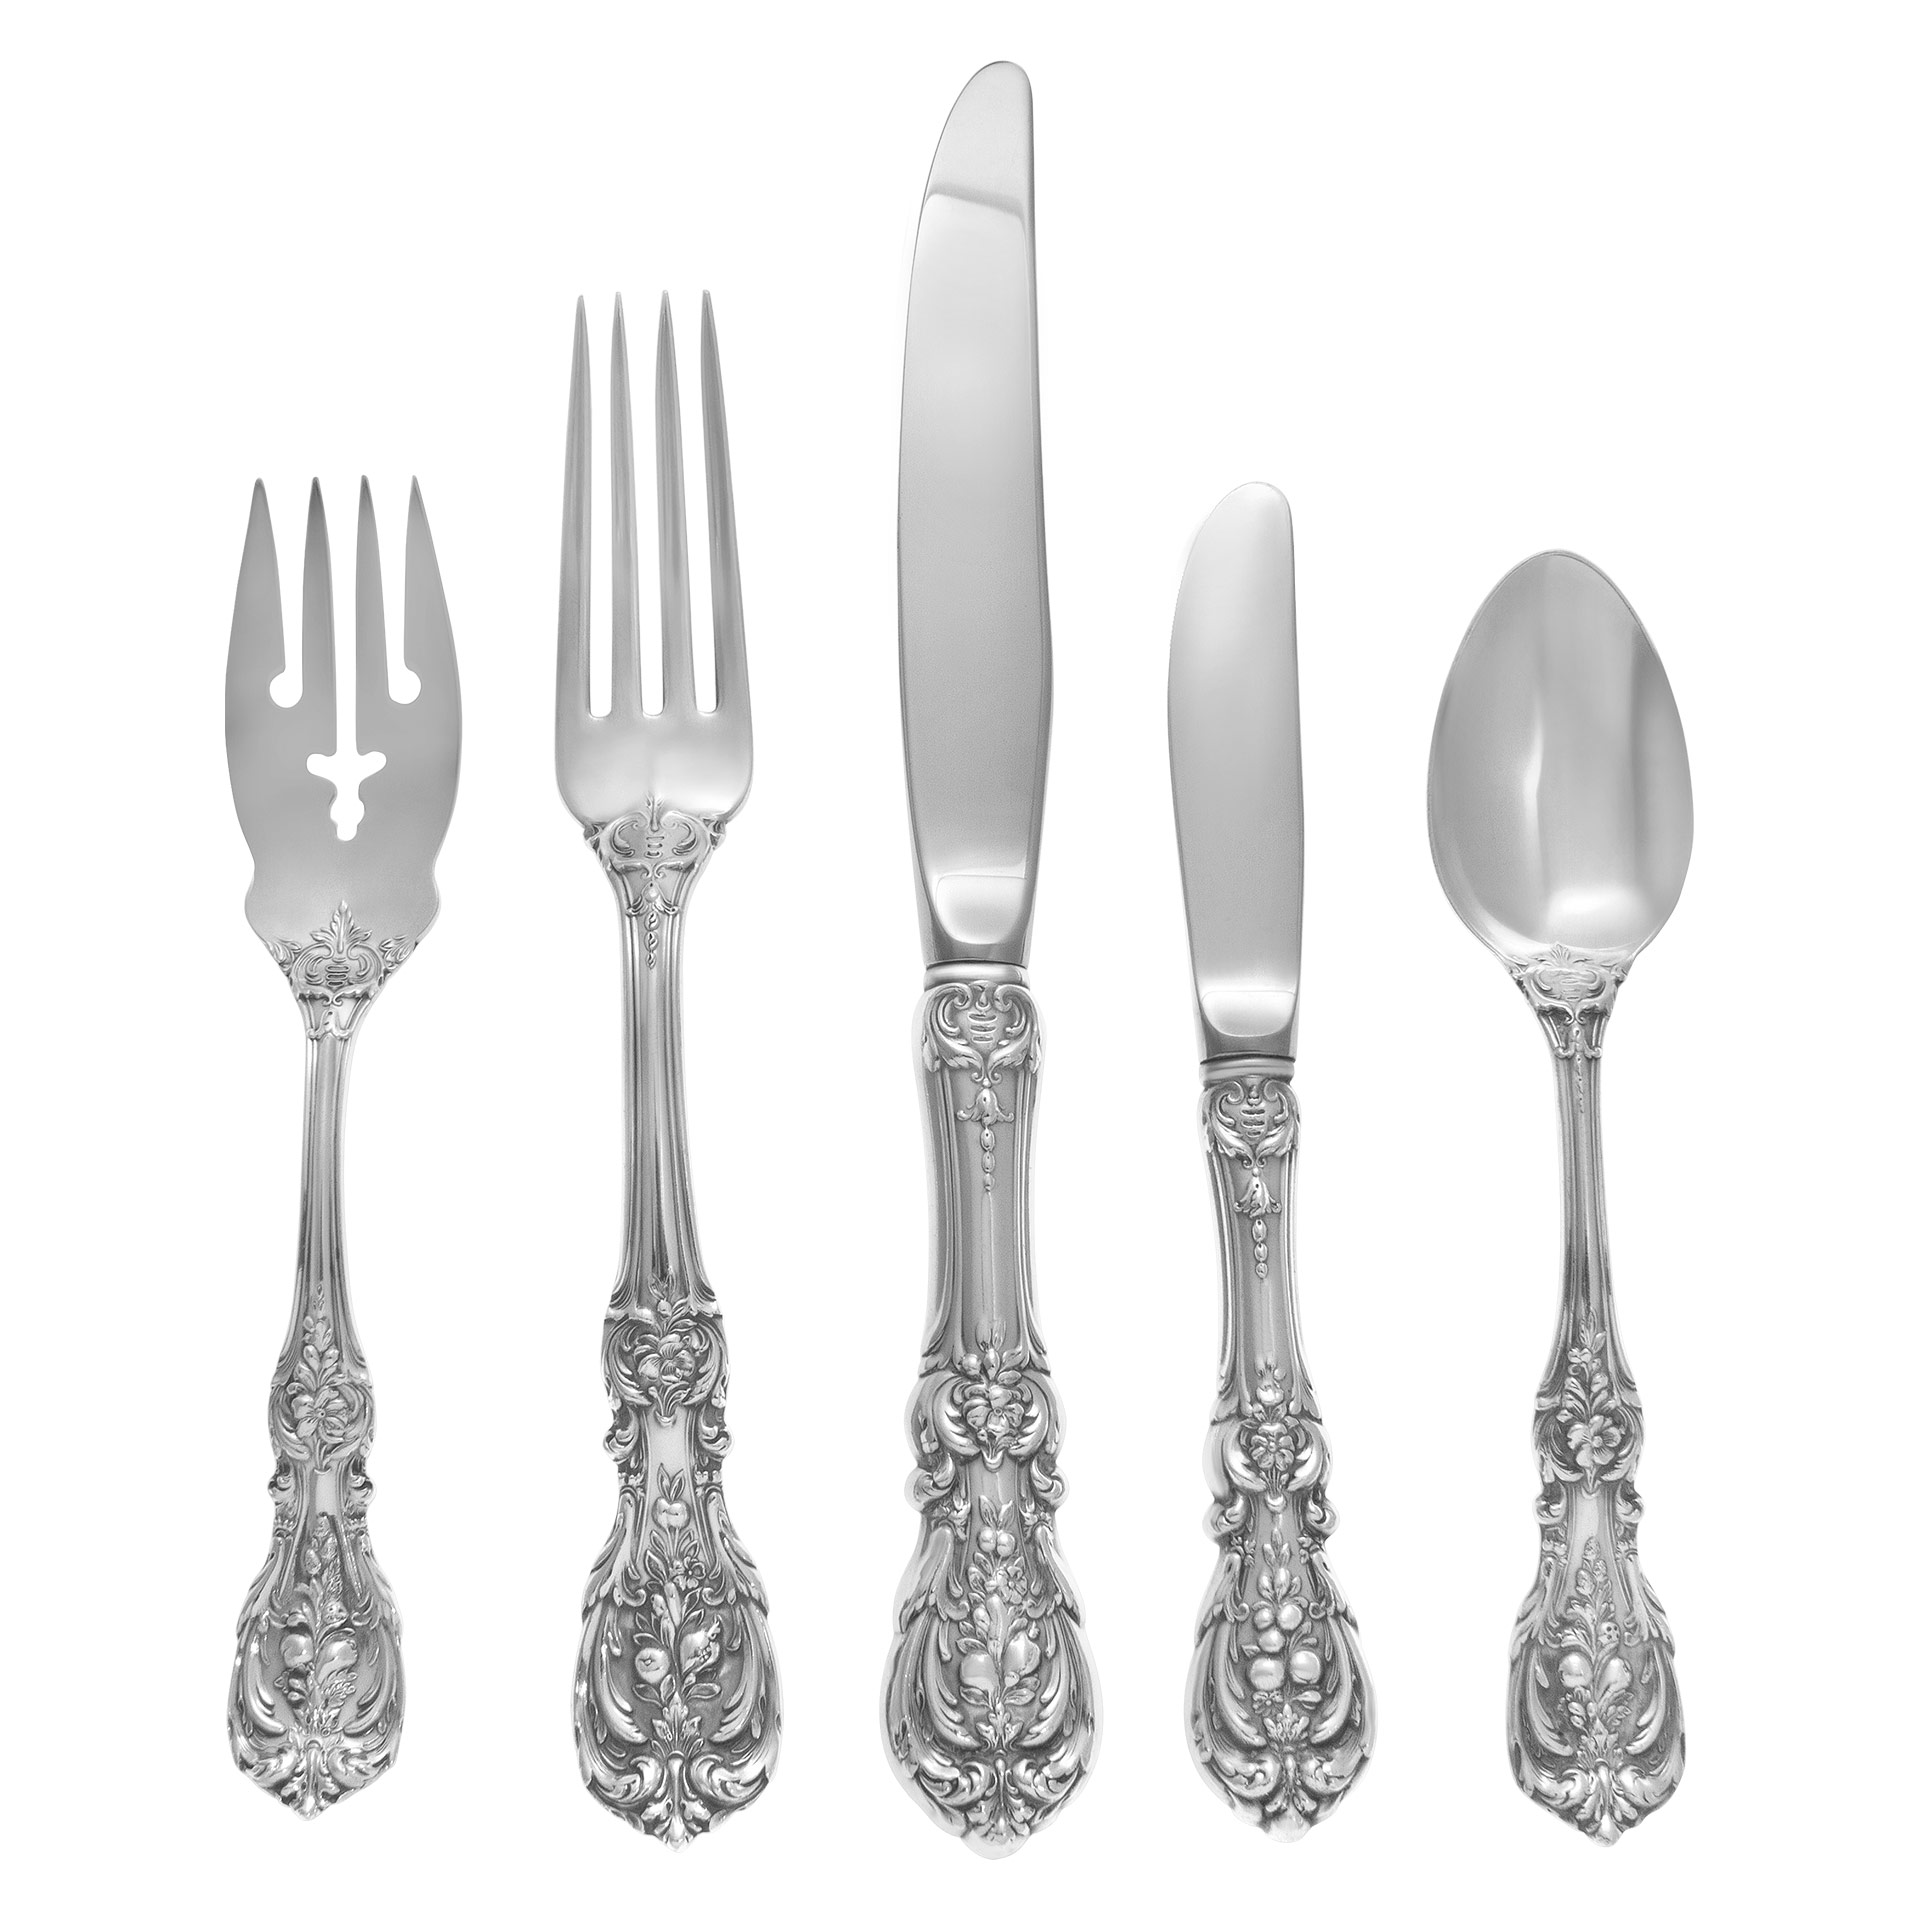 FRANCIS THE FIRST sterling silver flatware set patented in 1907 by Reed & Barton- TOTAL 58 PIECES- 4 place set for 10 (with xtras) and 5 serving pieces.